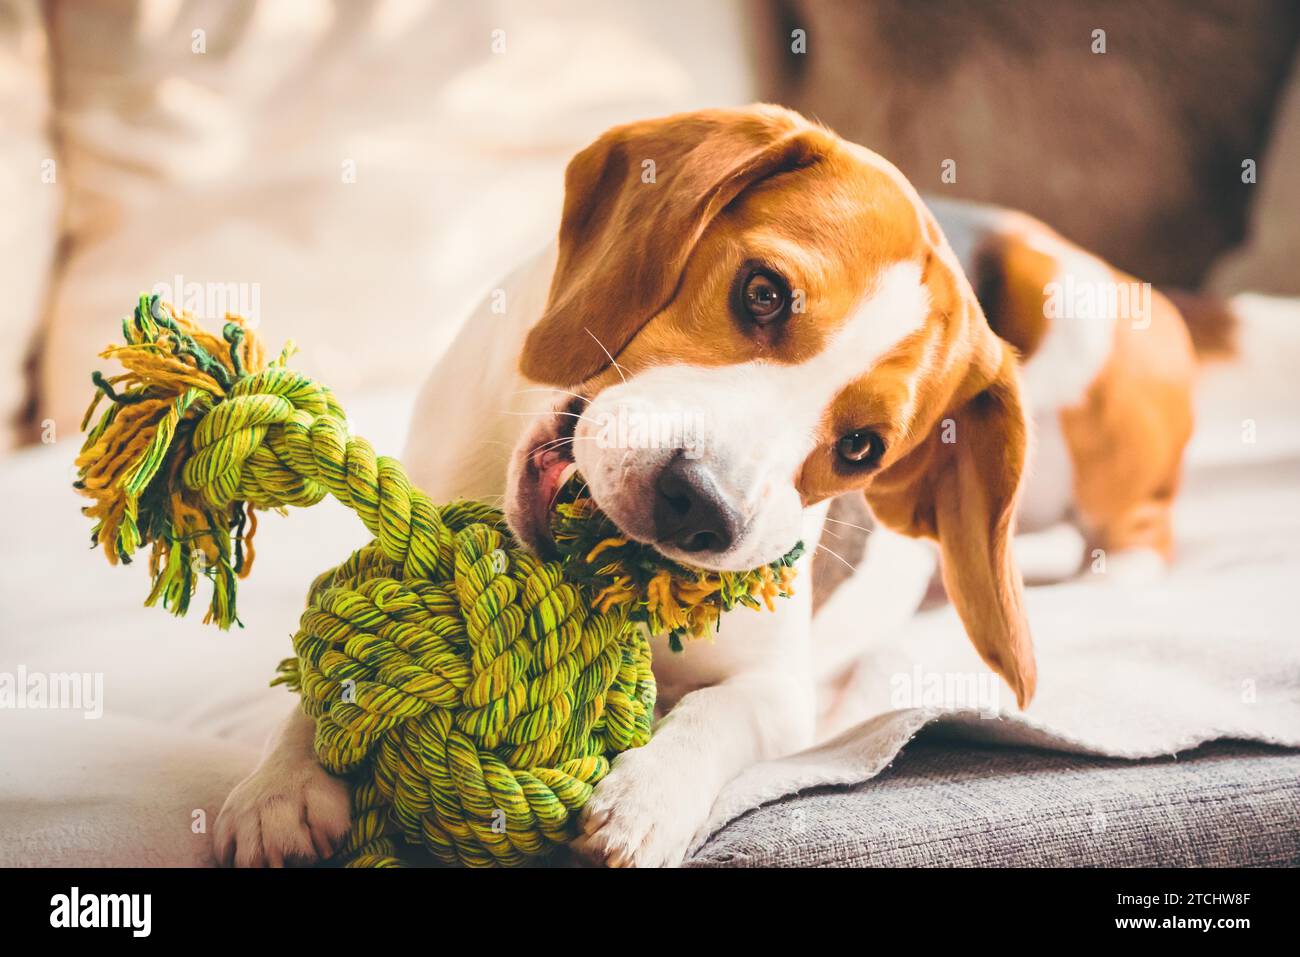 Dog with rope toy on sofa. Excited about biting a toy. Copy space Stock Photo